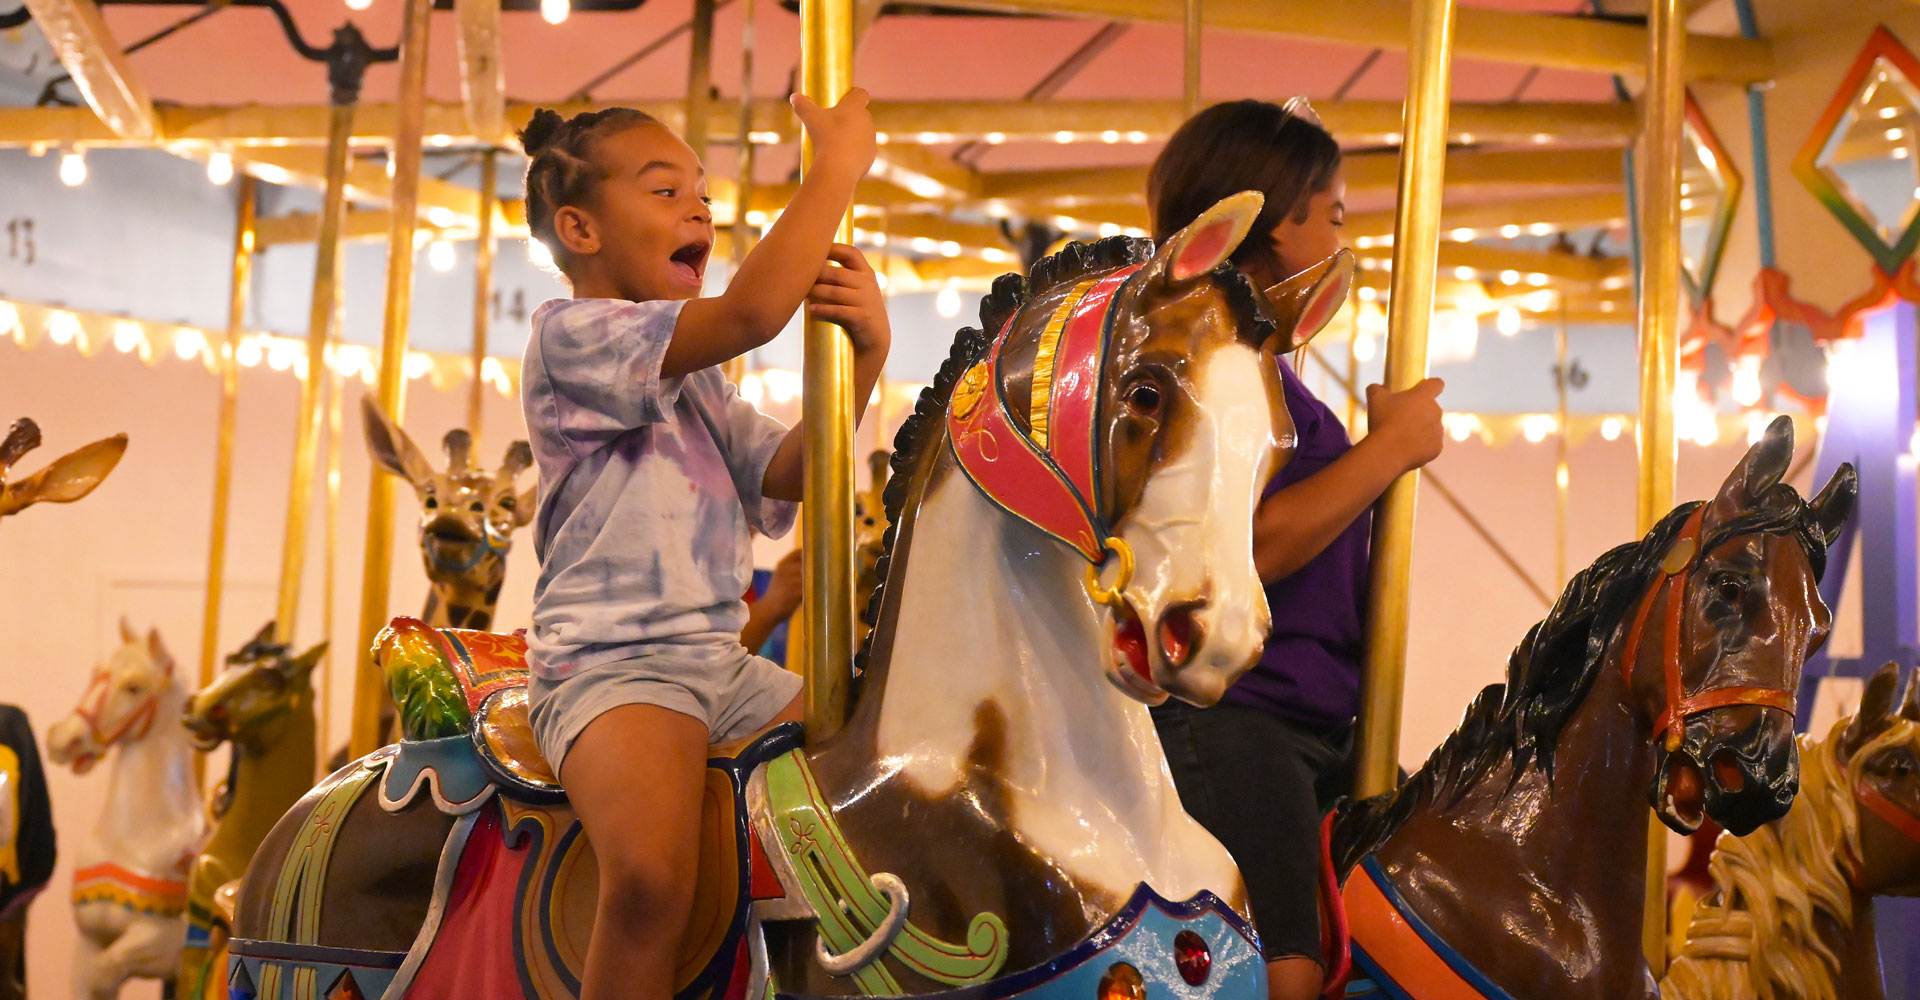 Child riding carousel horse and laughing.